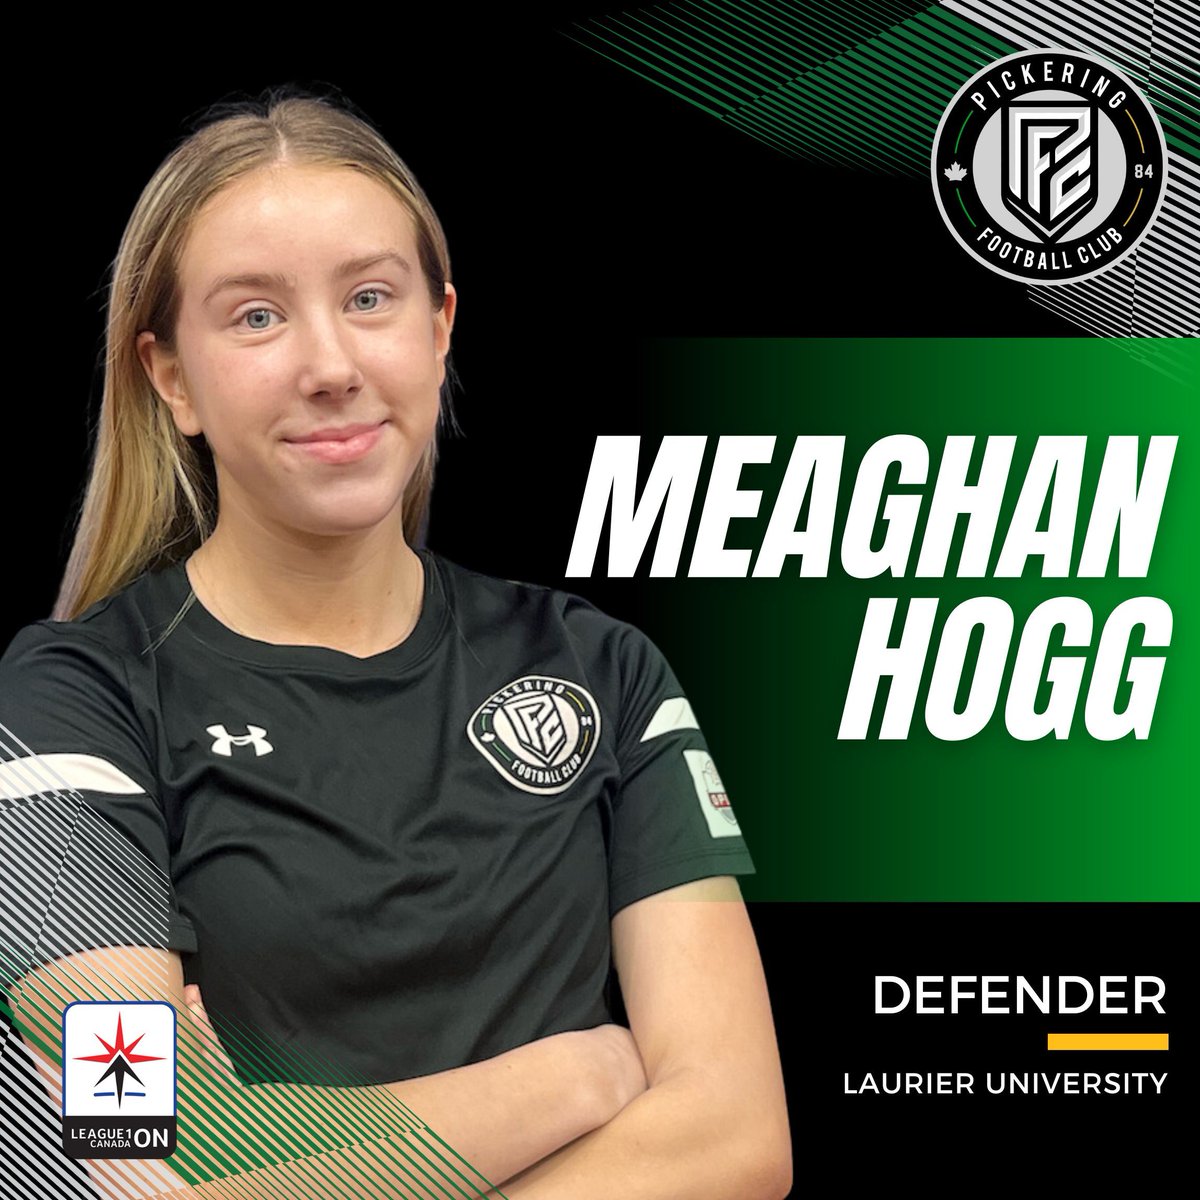 🚨 Signing Alert ! Pickering FC is pleased to announce the signing of home grown player Meaghan Hogg to our @league1ontario Women’s team. Meaghan joined Pickering FC as a 4 year old! Meaghan graduated to OPDL, then into our L1 reserves last year.

#PFC40YRSPROUD #DestinationClub